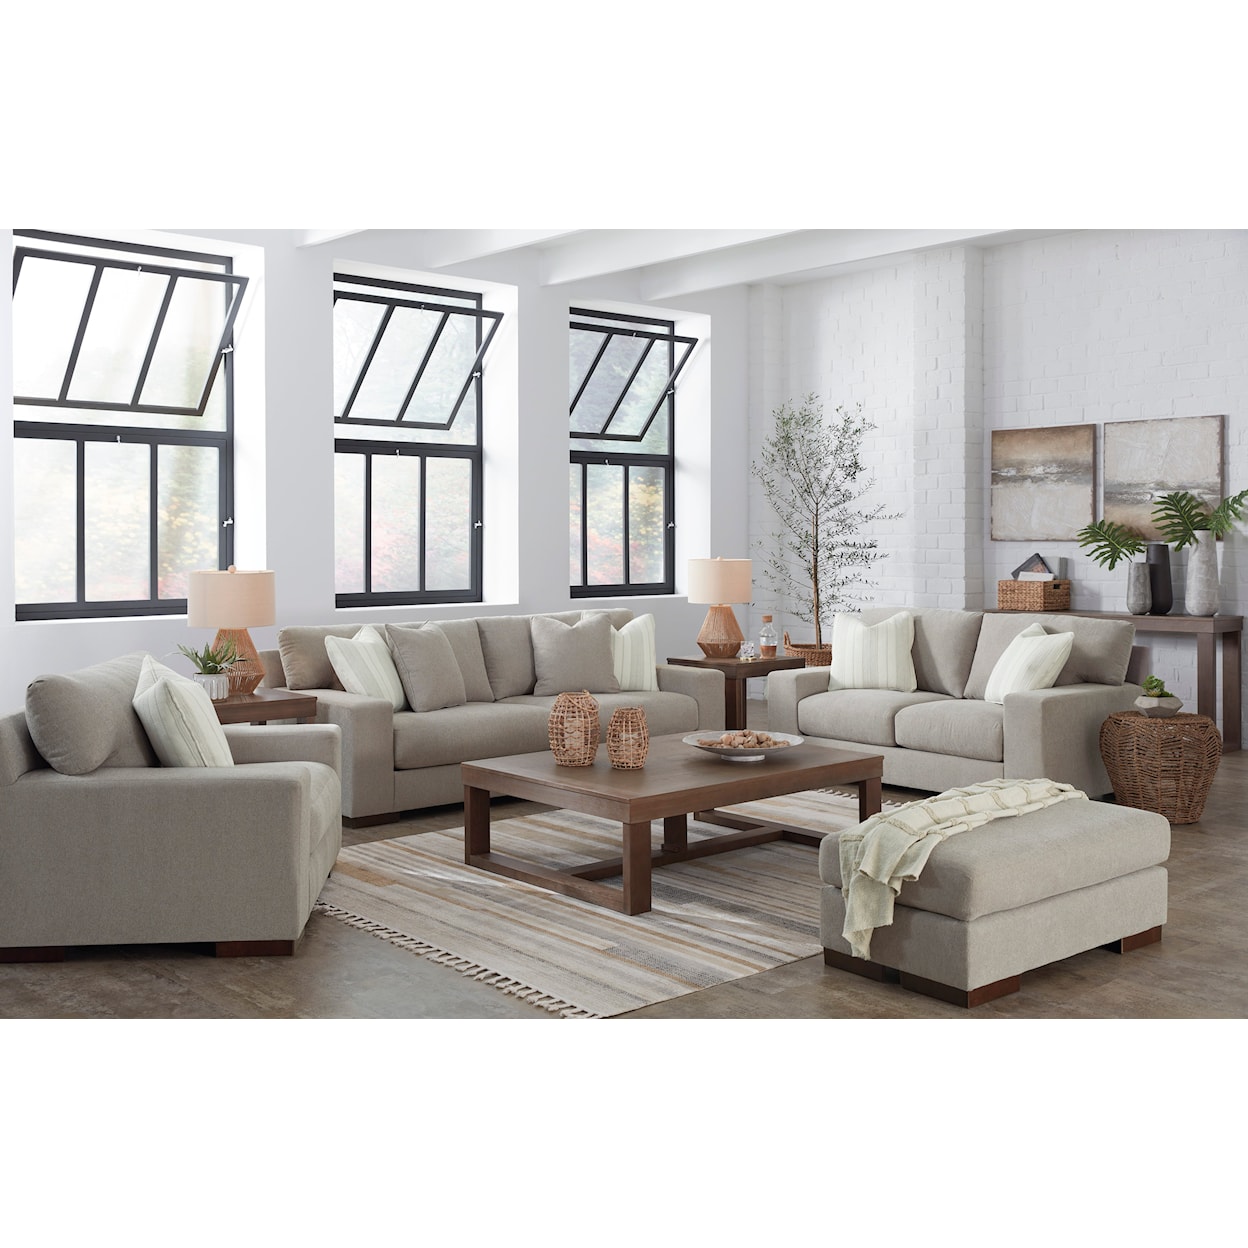 Signature Design by Ashley Maggie Living Room Set